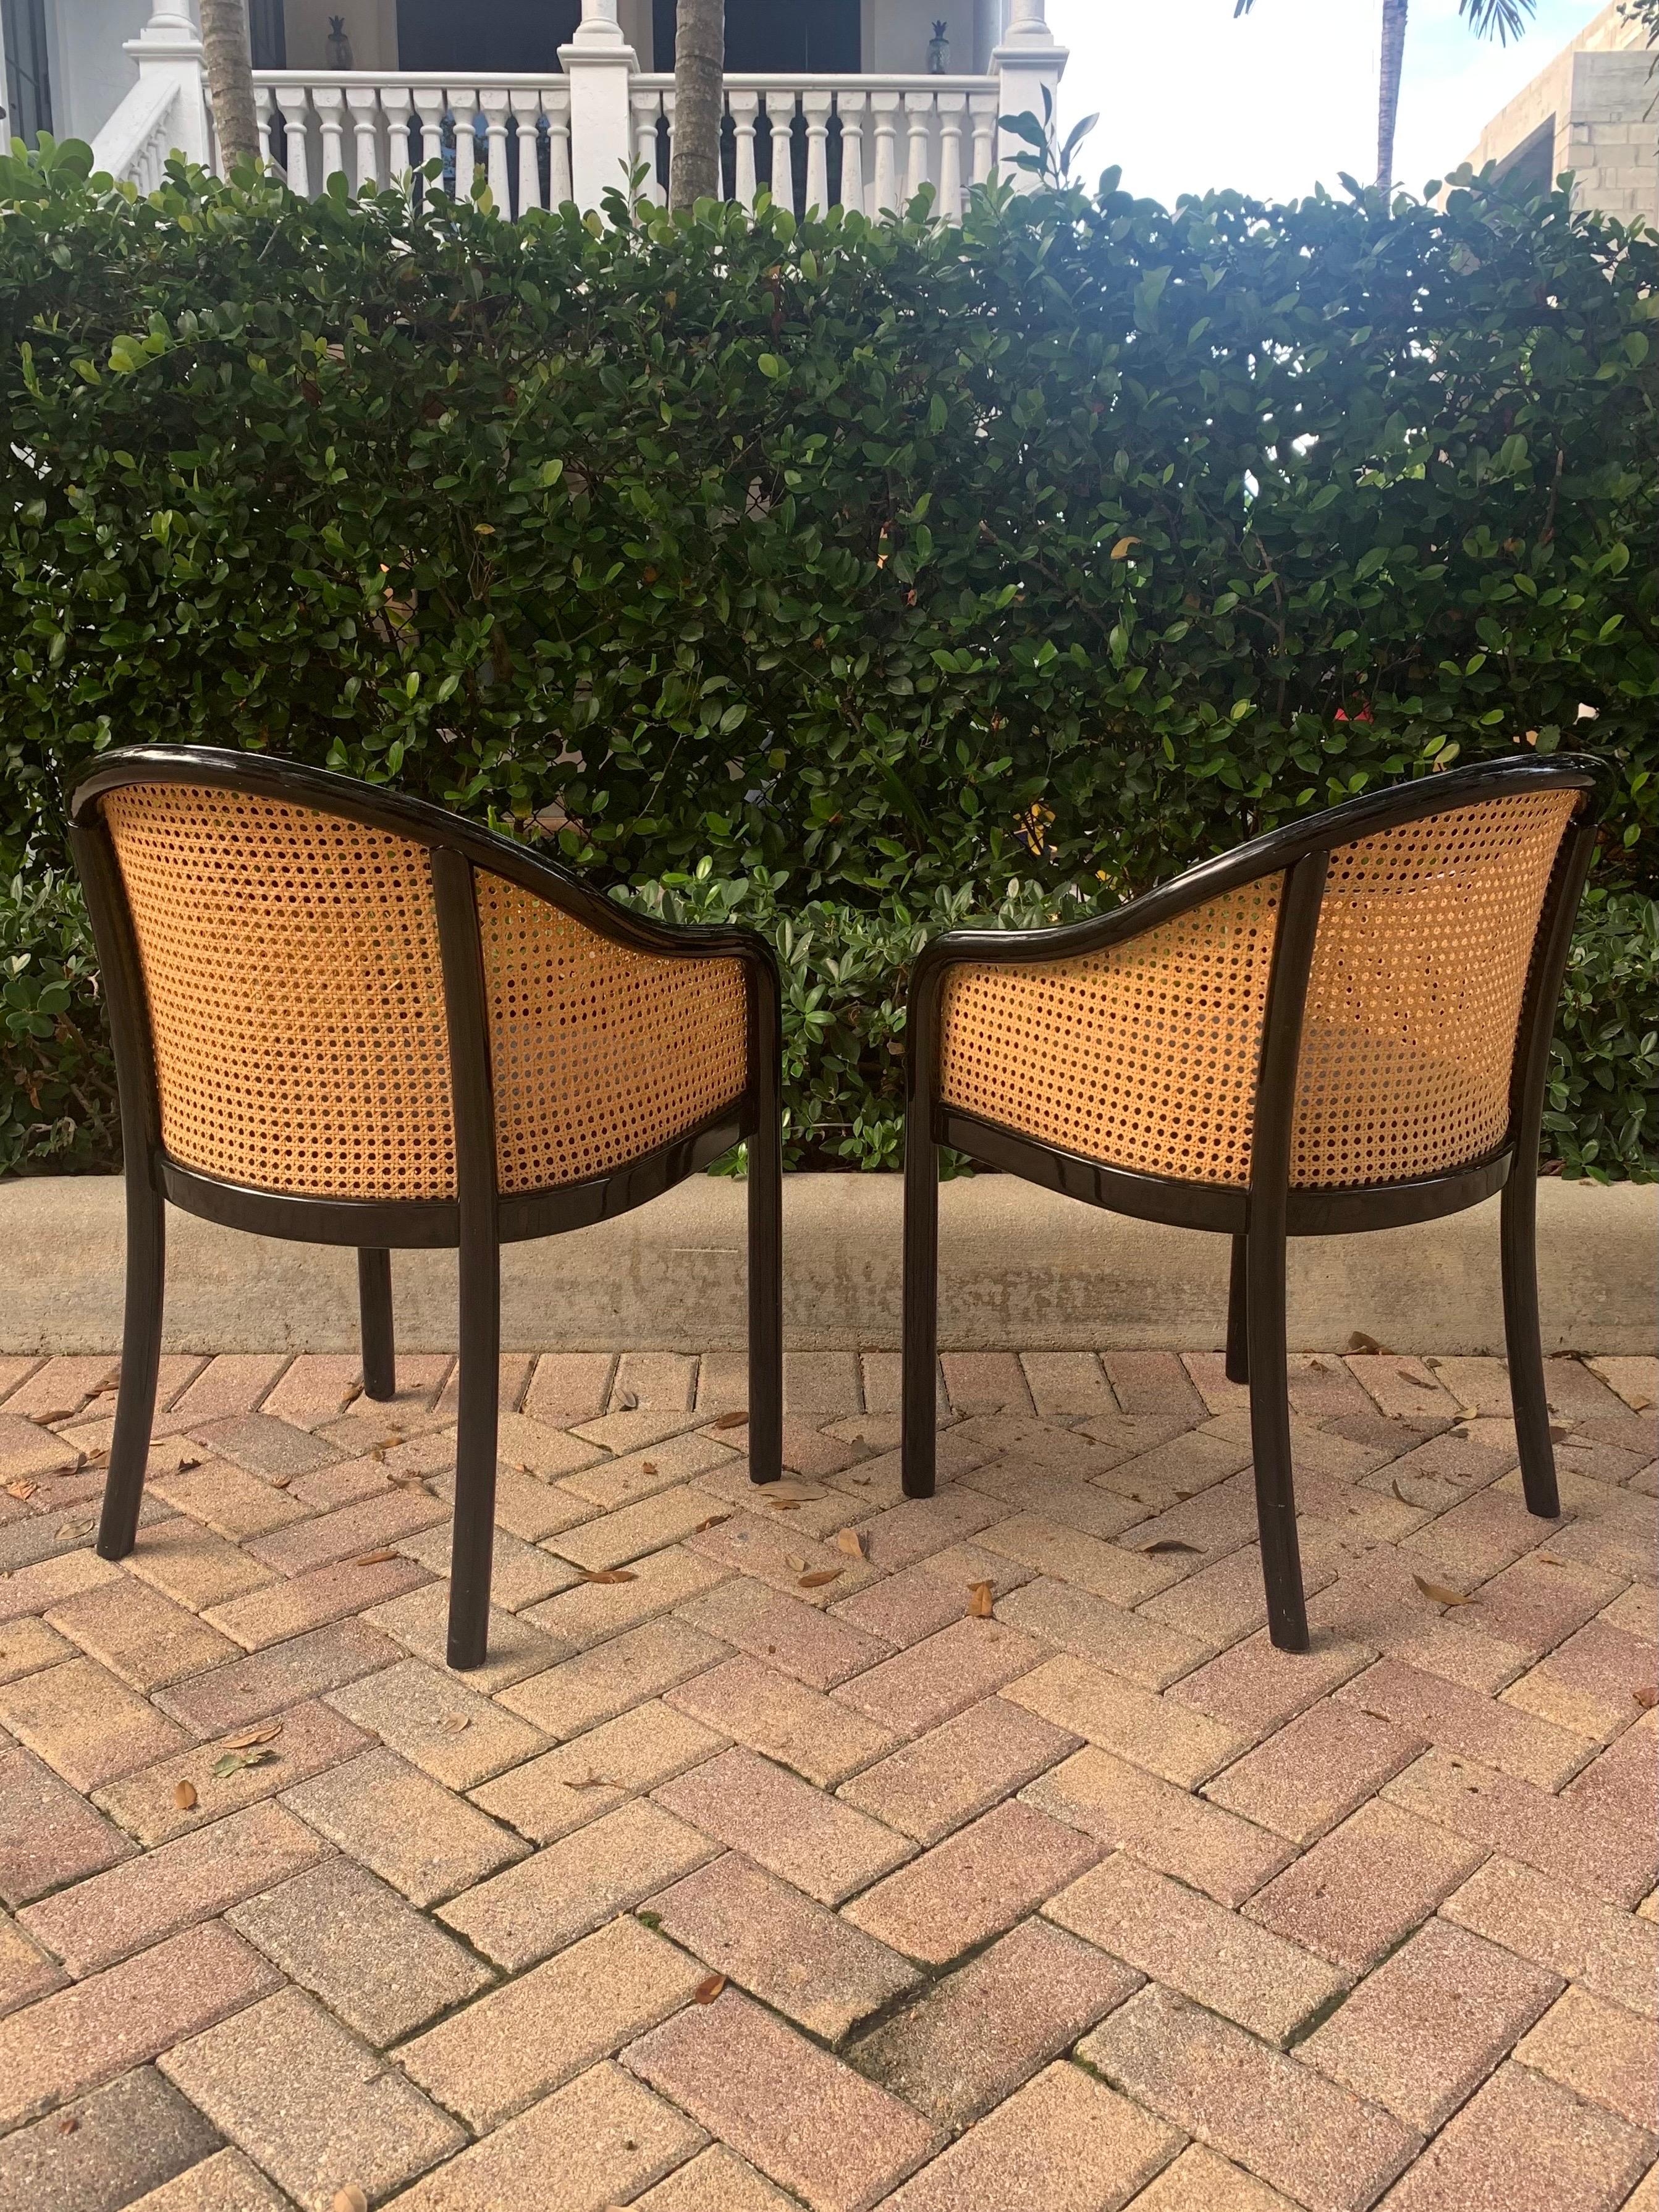 Ward Bennett Landmark Style Lounge Chairs in Wood and Cane, a Pair In Good Condition For Sale In Boynton Beach, FL